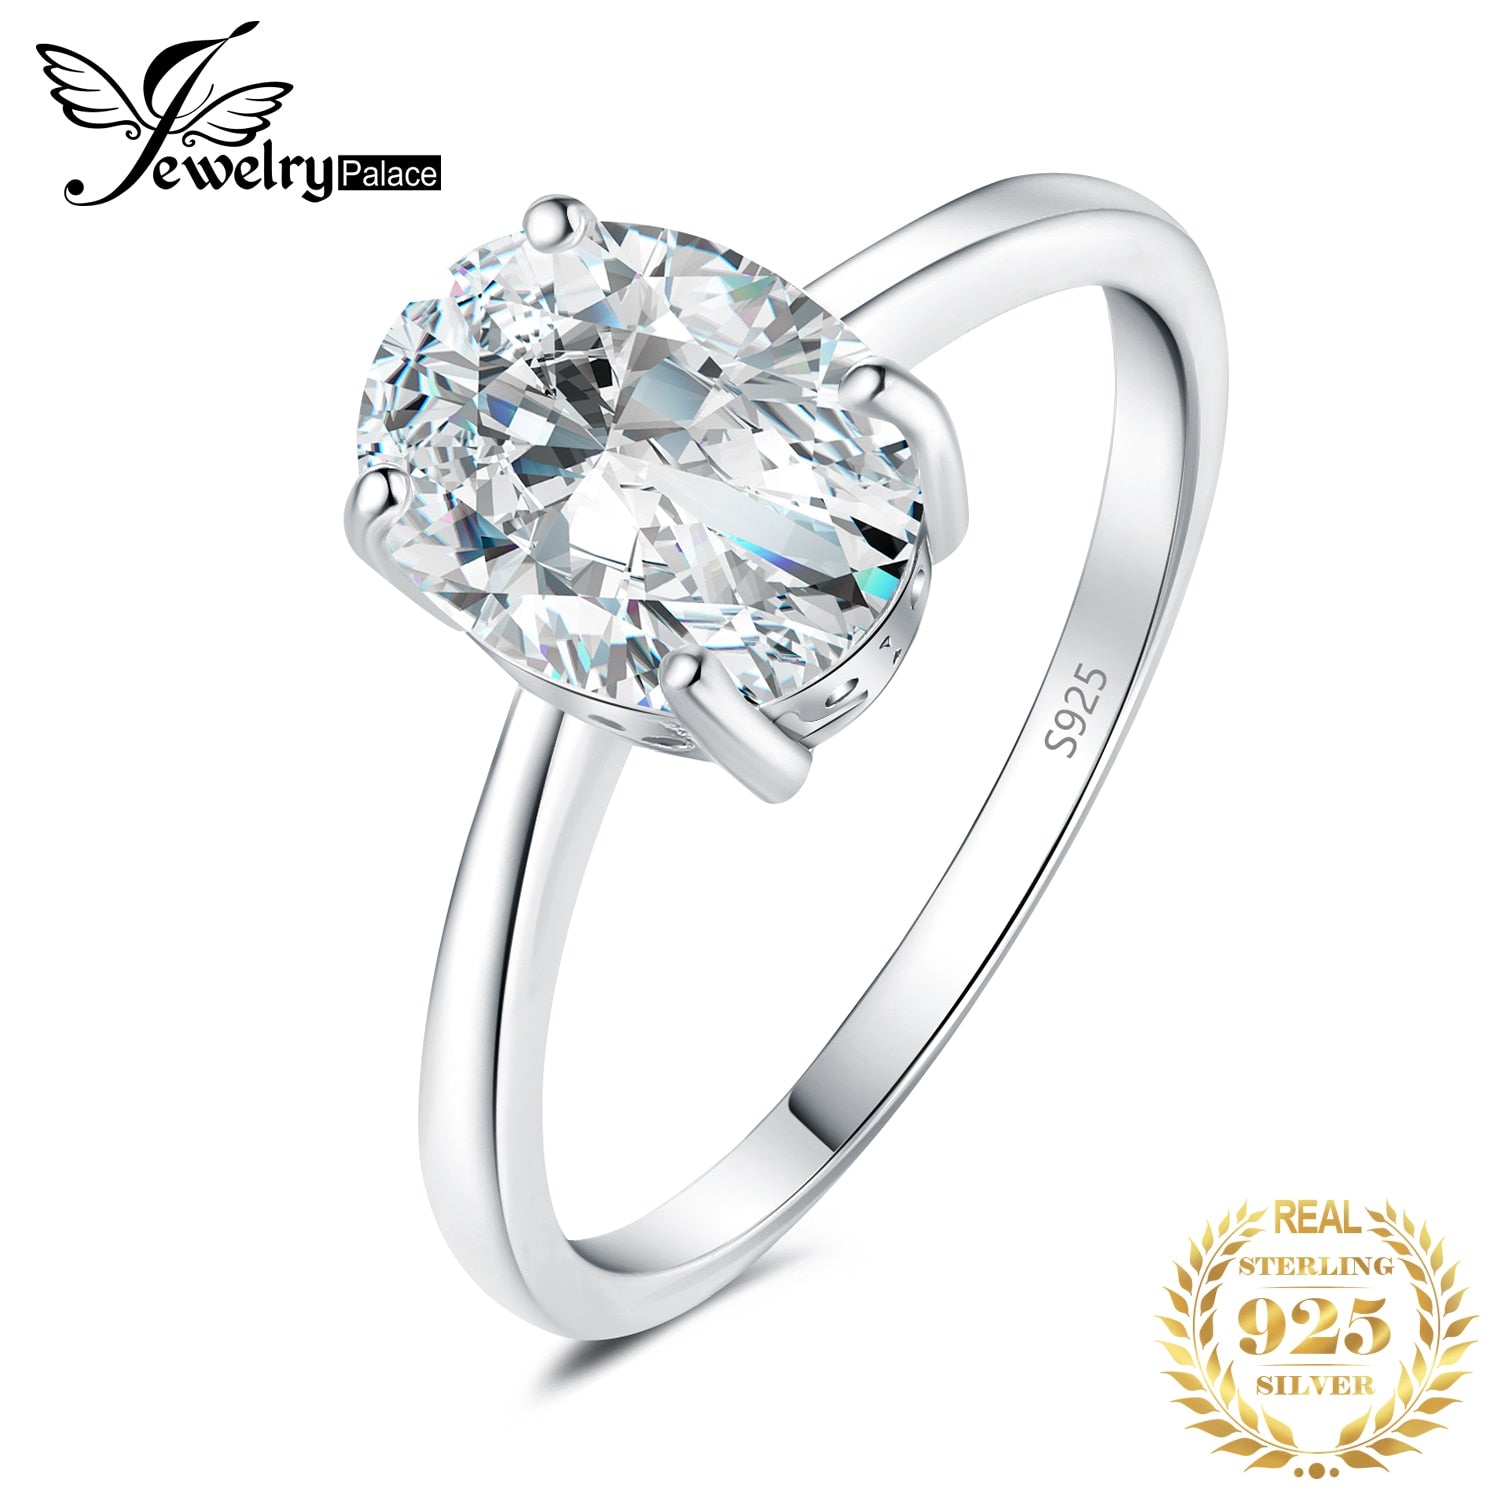 JewelryPalace Moissanite D Color 1ct 2ct Oval S925 Sterling Silver Solitaire Wedding Ring for Woman Yellow Rose Gold Plated